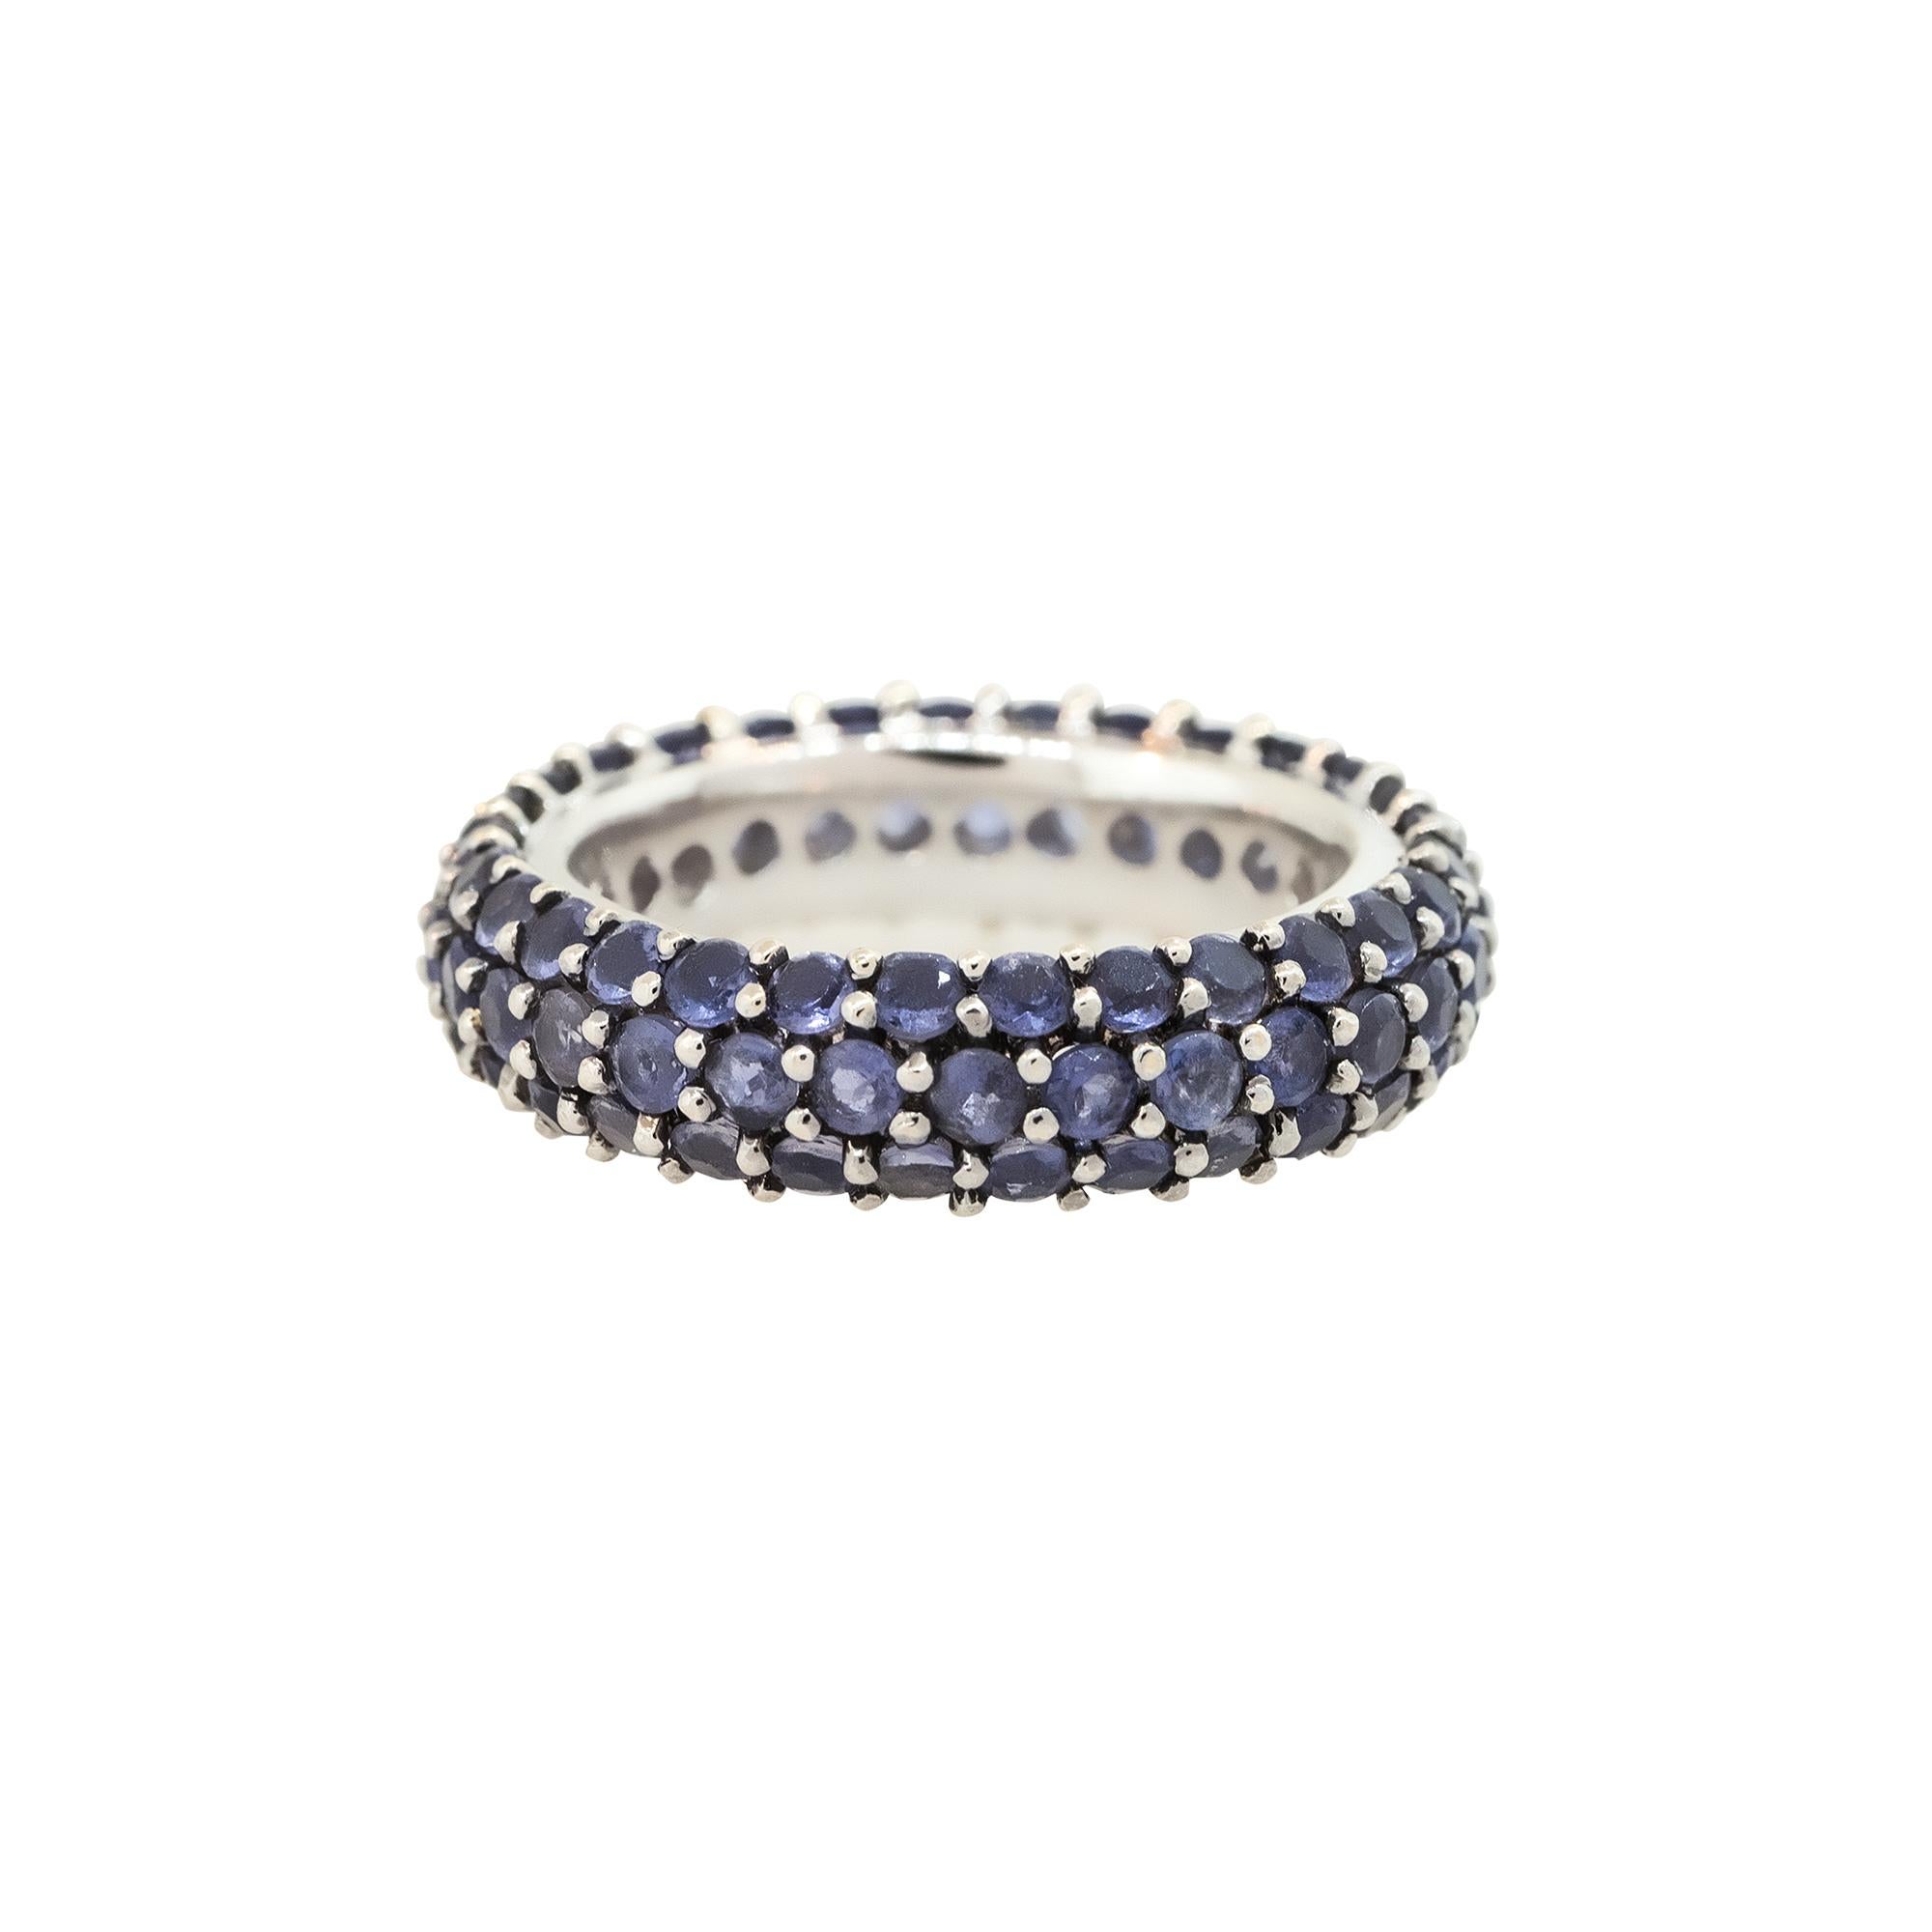 Material: 18k White Gold
Gemstone Details: Approx. 2.50ctw of Pave set Tanzanite
Size: 7
Weight: 4.3dwt
Additional Details: This item comes with a presentation box!
SKU: A30315704